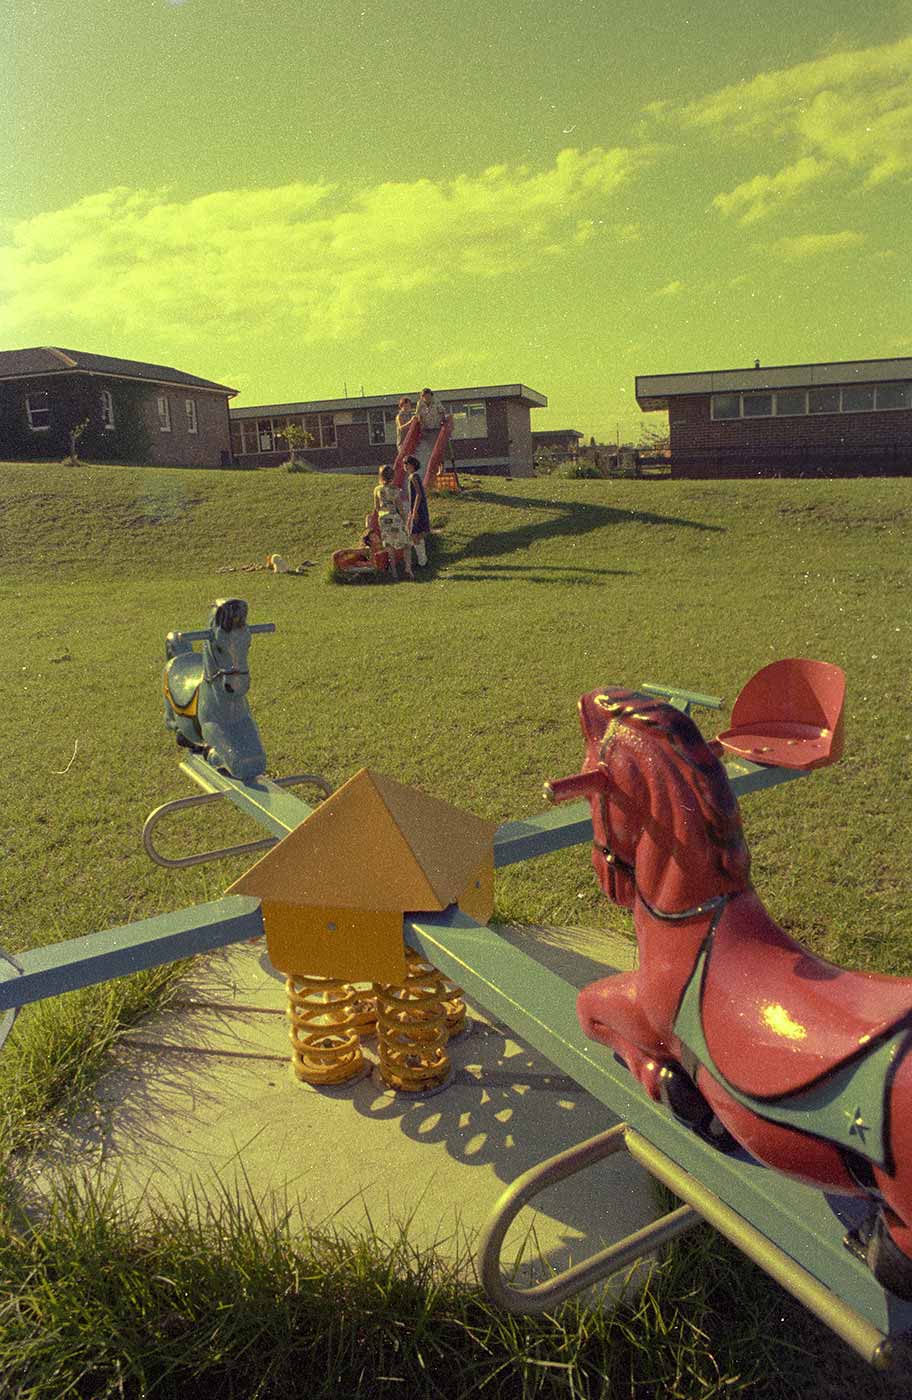 Colour photograph showing a four-ended seesaw with horses on one bar, and seats on the other. Children play in the distance on a slippery dip at the top of a grassed hill. Several brick buildings are visible in the background. - click to view larger image